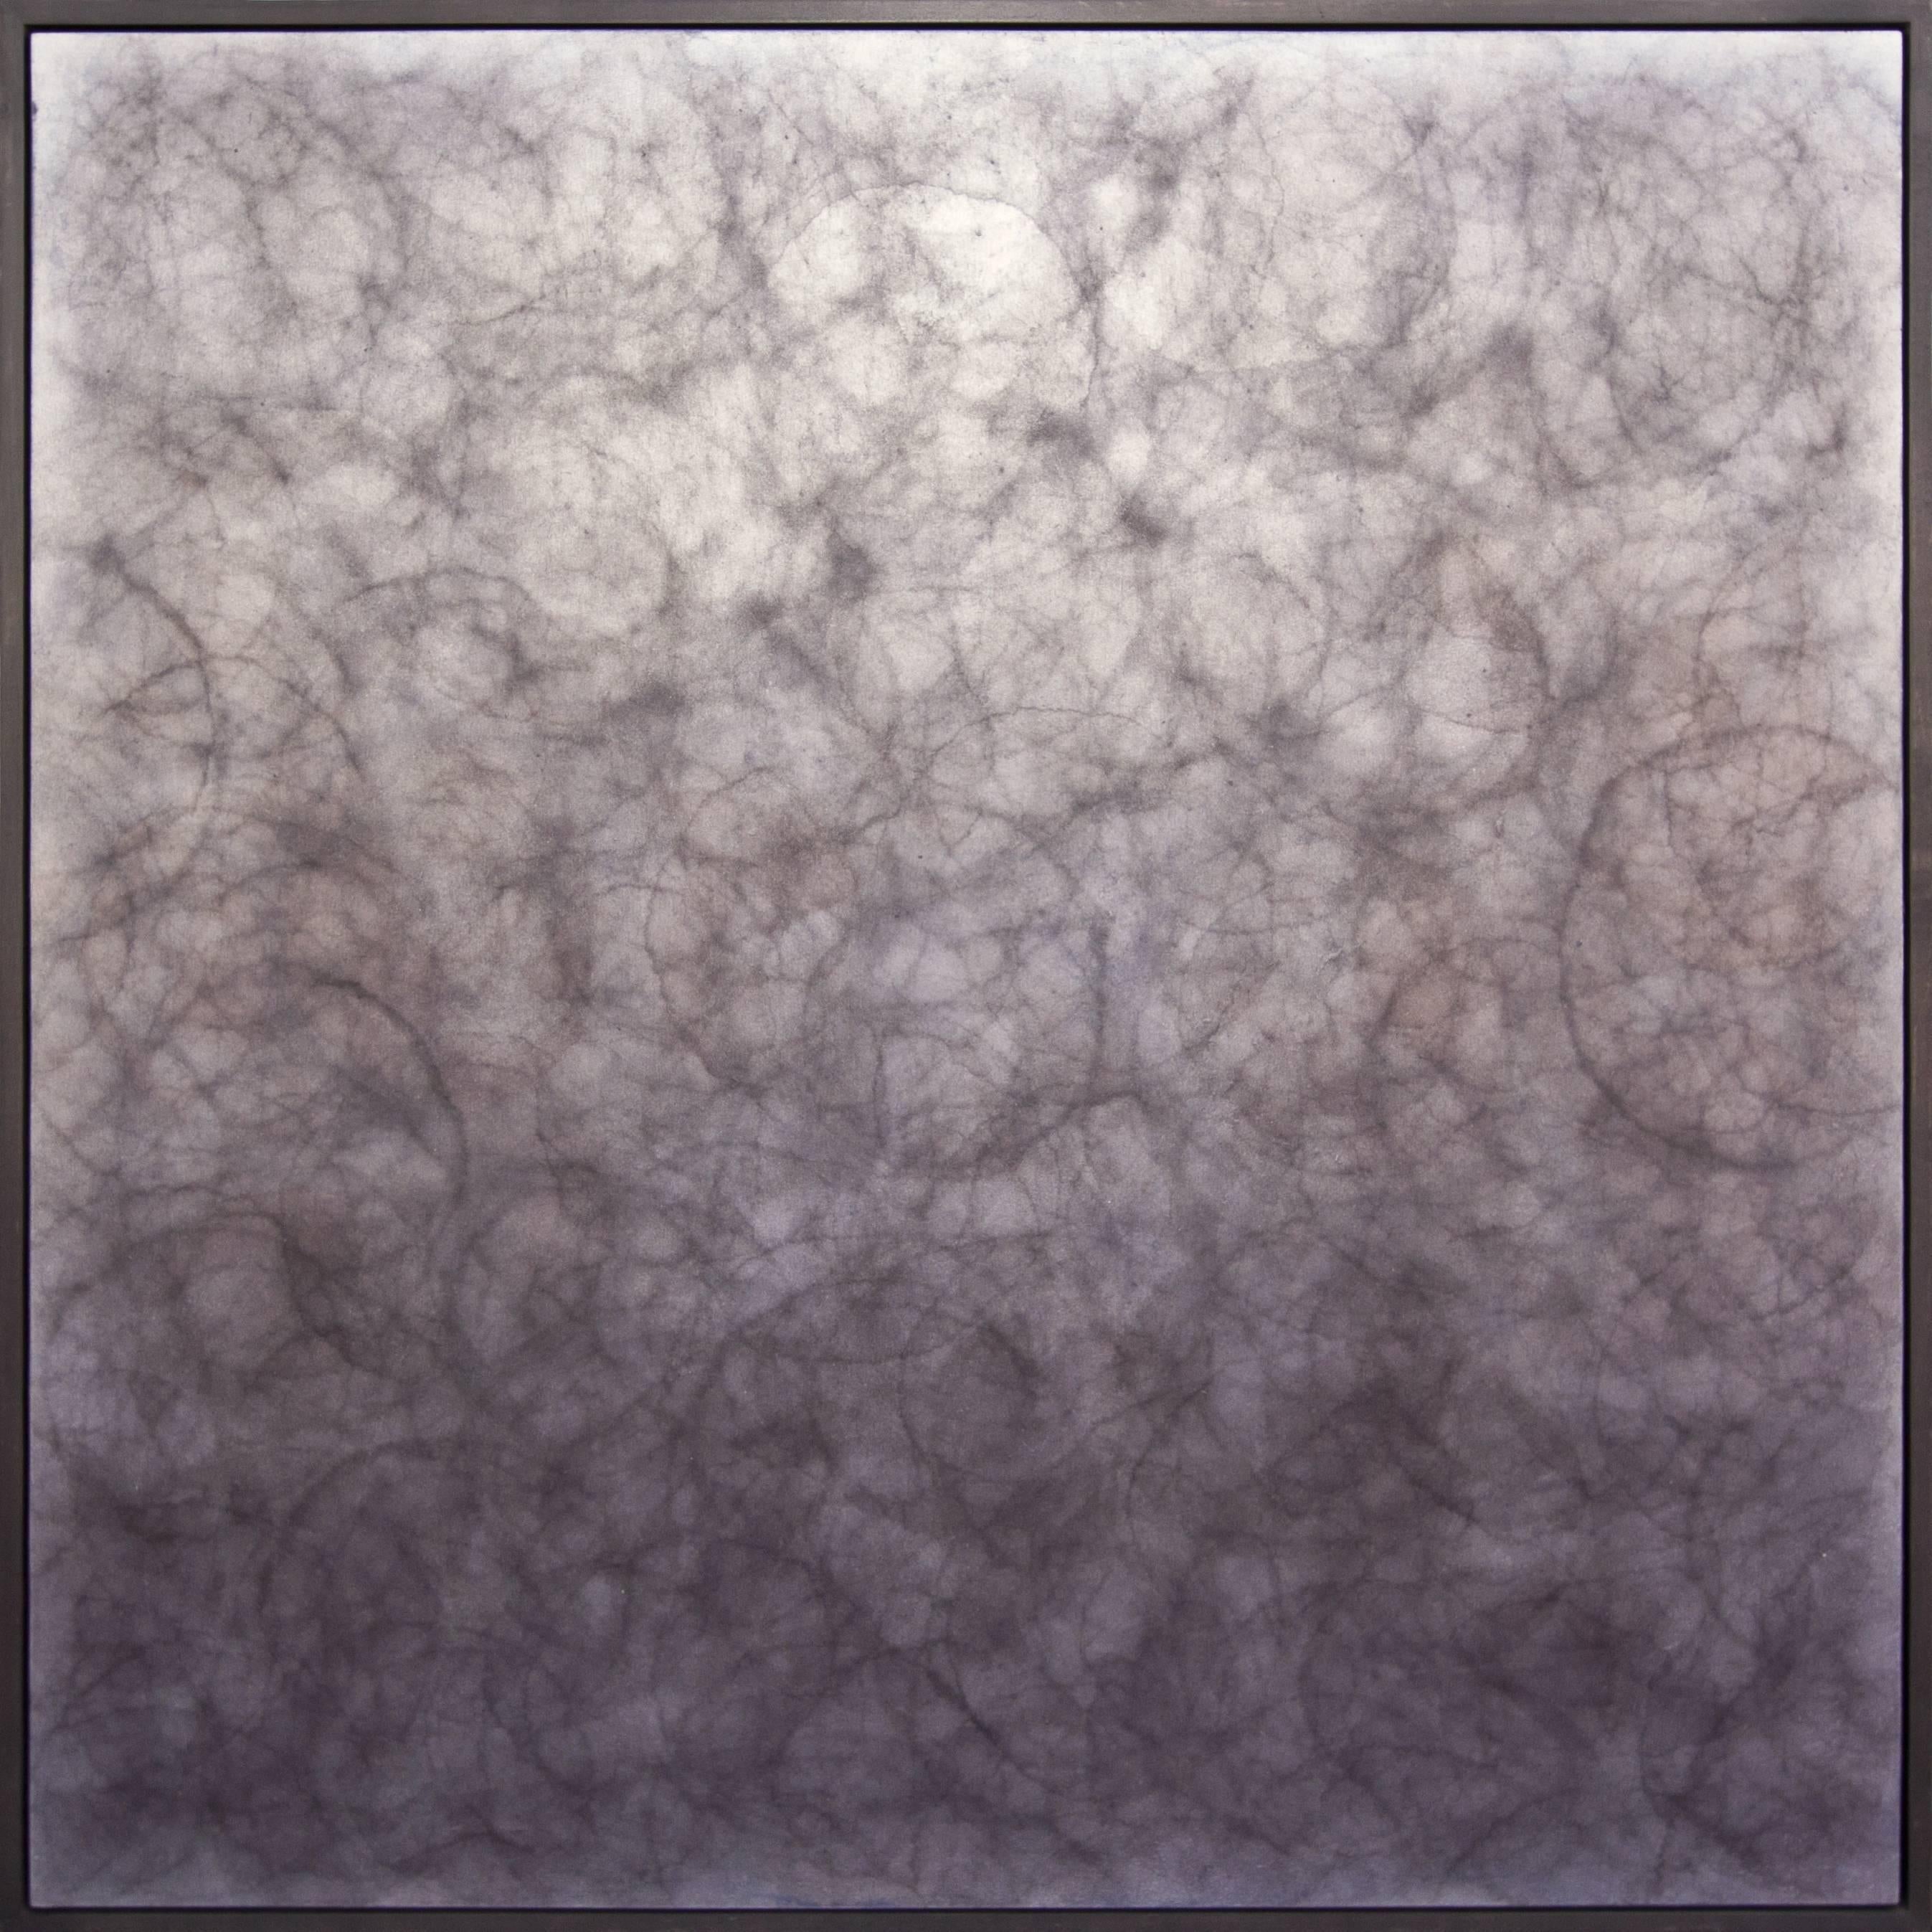 This abstract diptych painting by Roger Mudre features a charcoal grey palette, with light circles loosely overlapping one another across each panel. Each panel is professionally framed in dark pewter floater frames. The two panels are 41.5